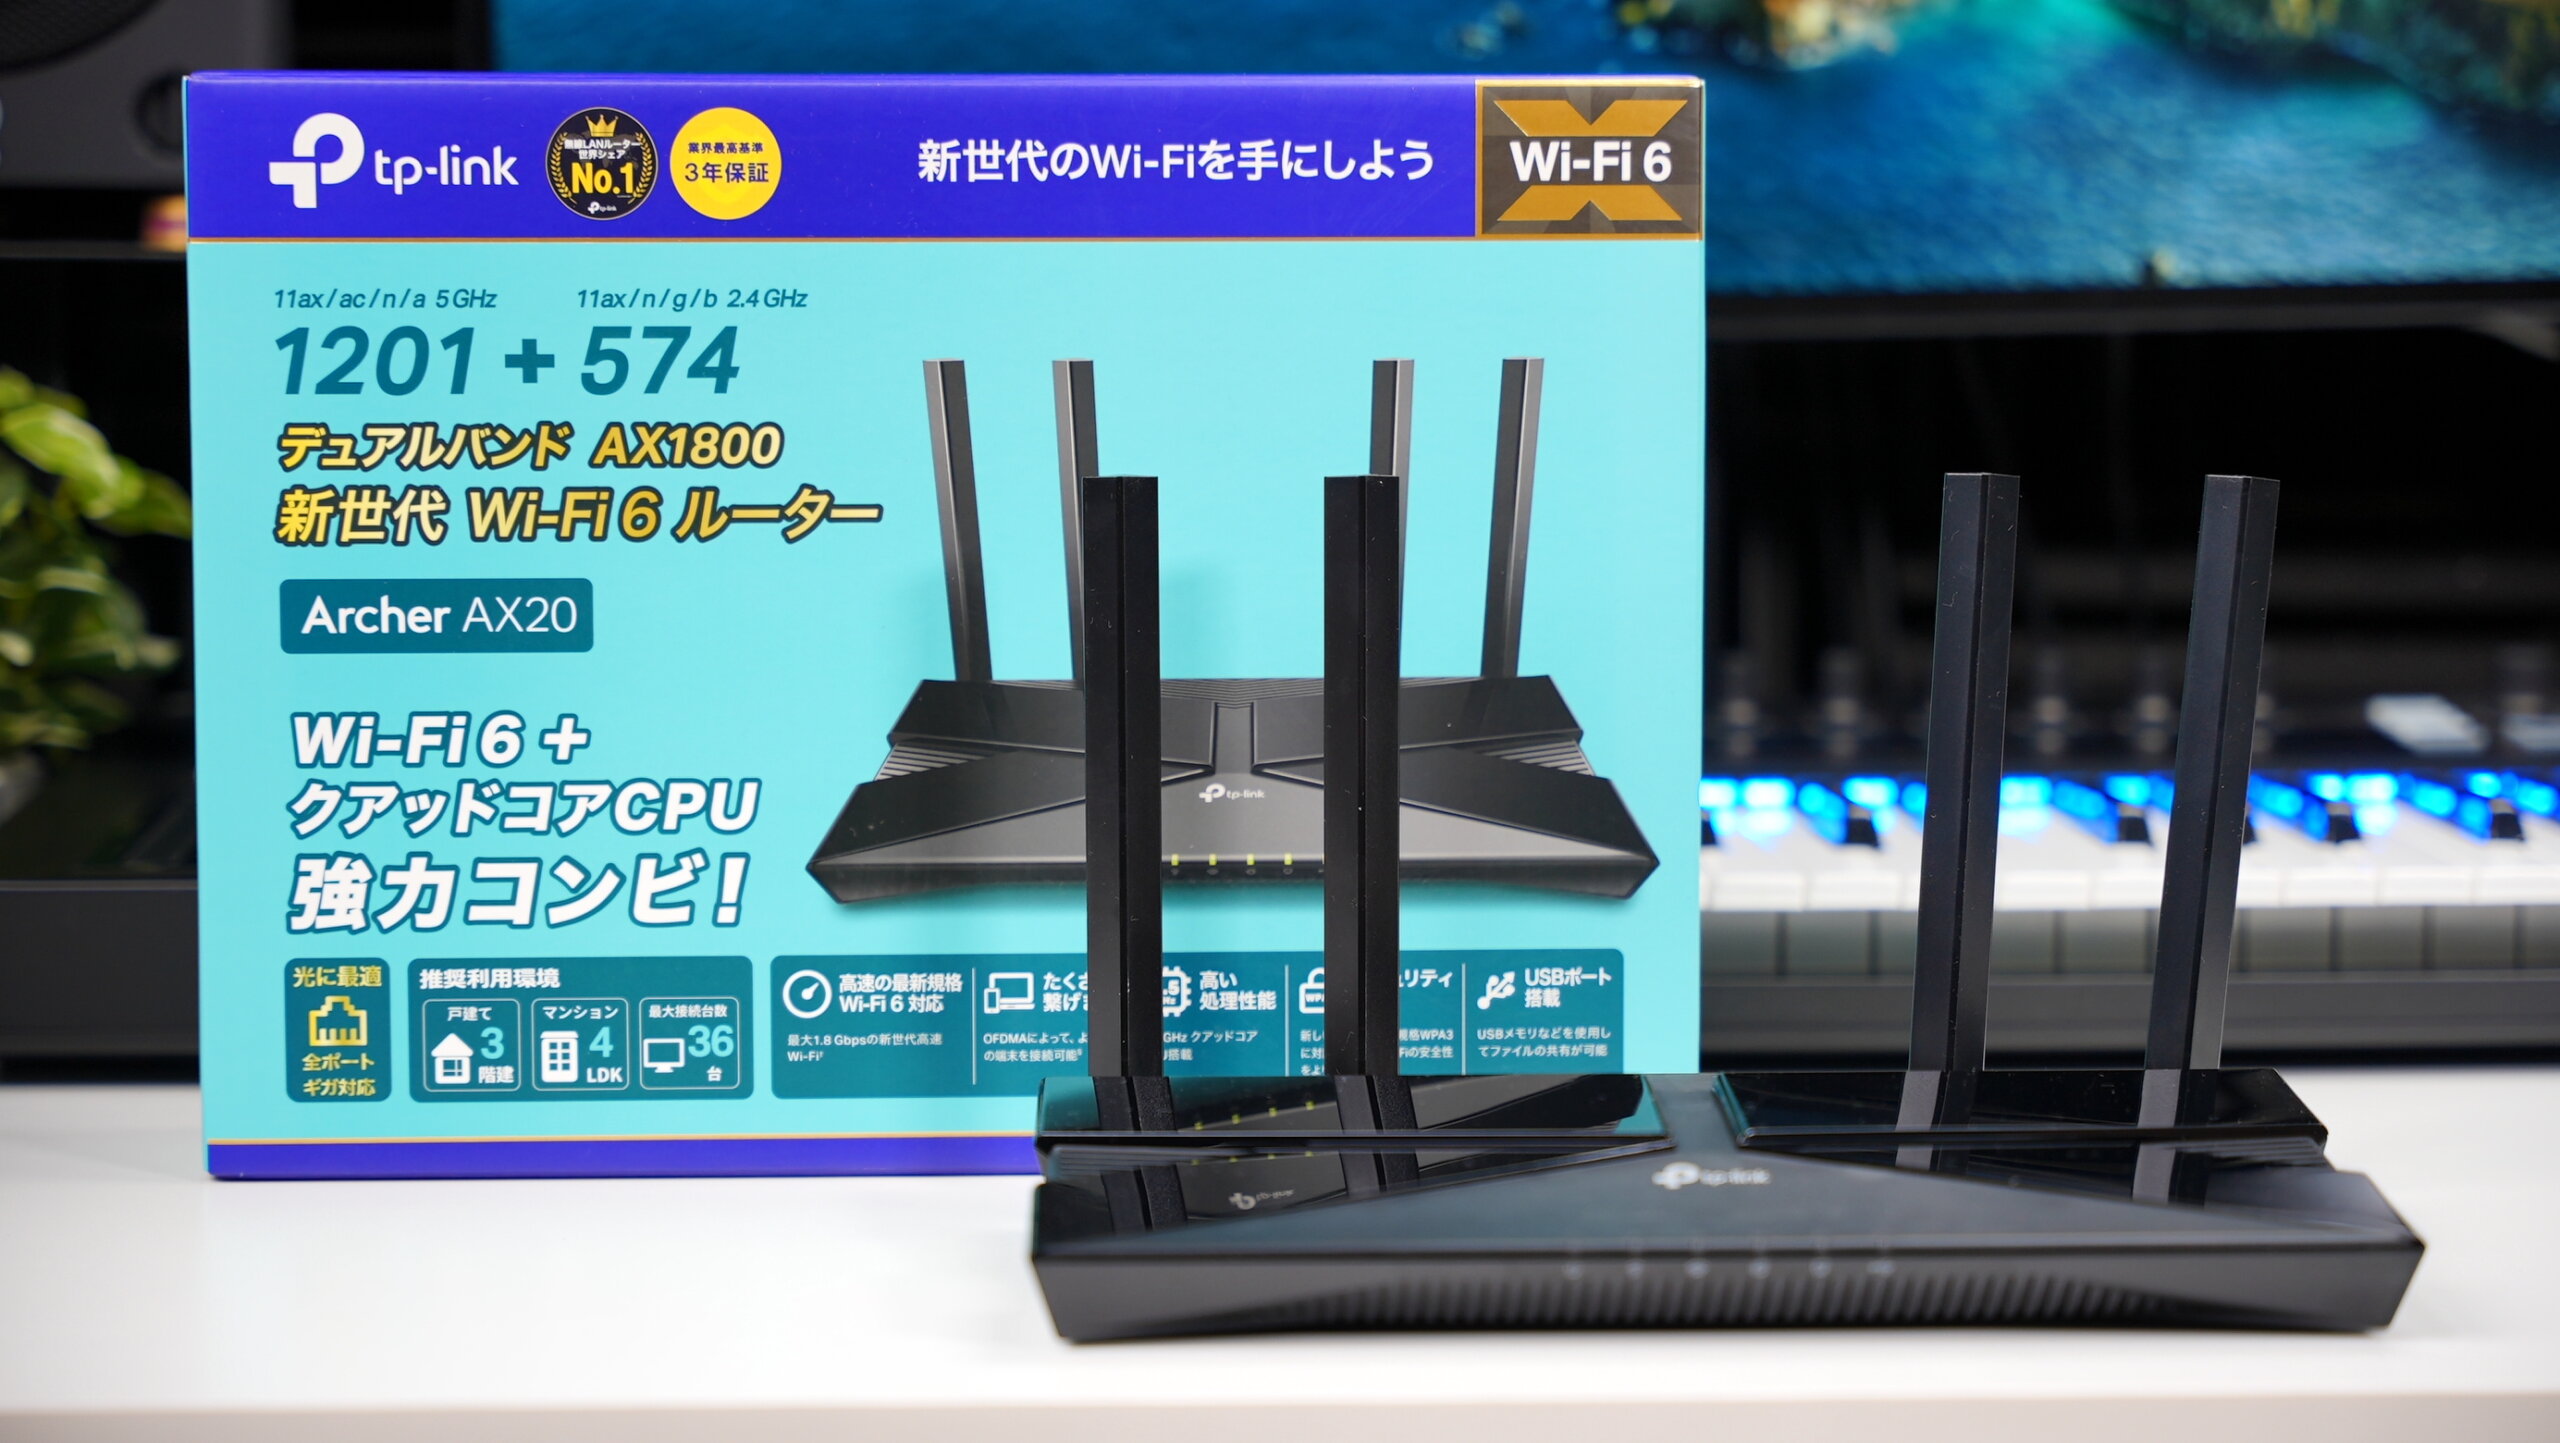 TP-Link「Archer AX20」をレビュー。Wi-Fi 6に対応したコスパ良好のルーター